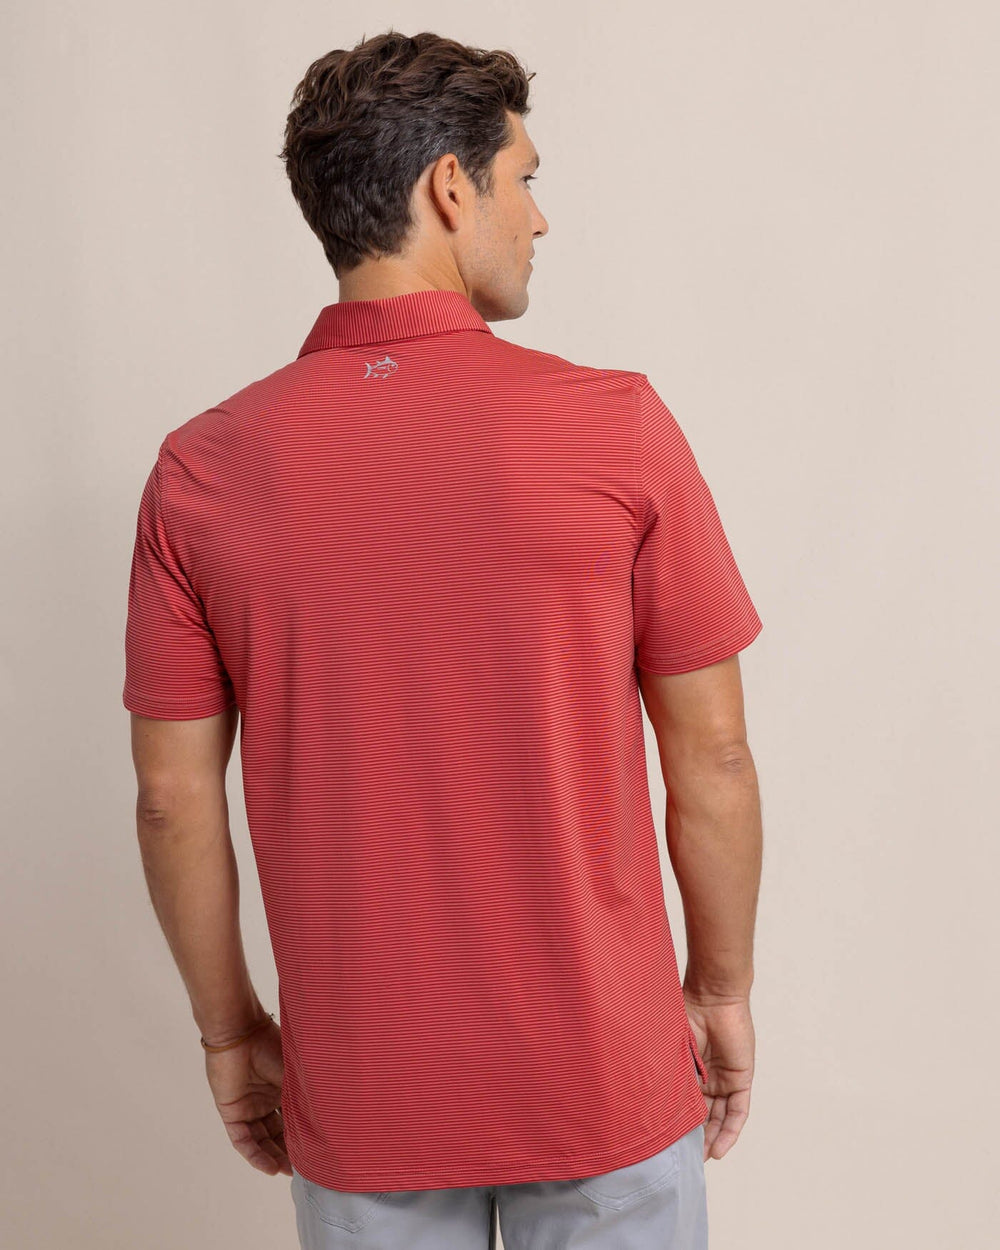 The back view of the Southern Tide brrr-eeze Meadowbrook Stripe Polo by Southern Tide - Mineral Red